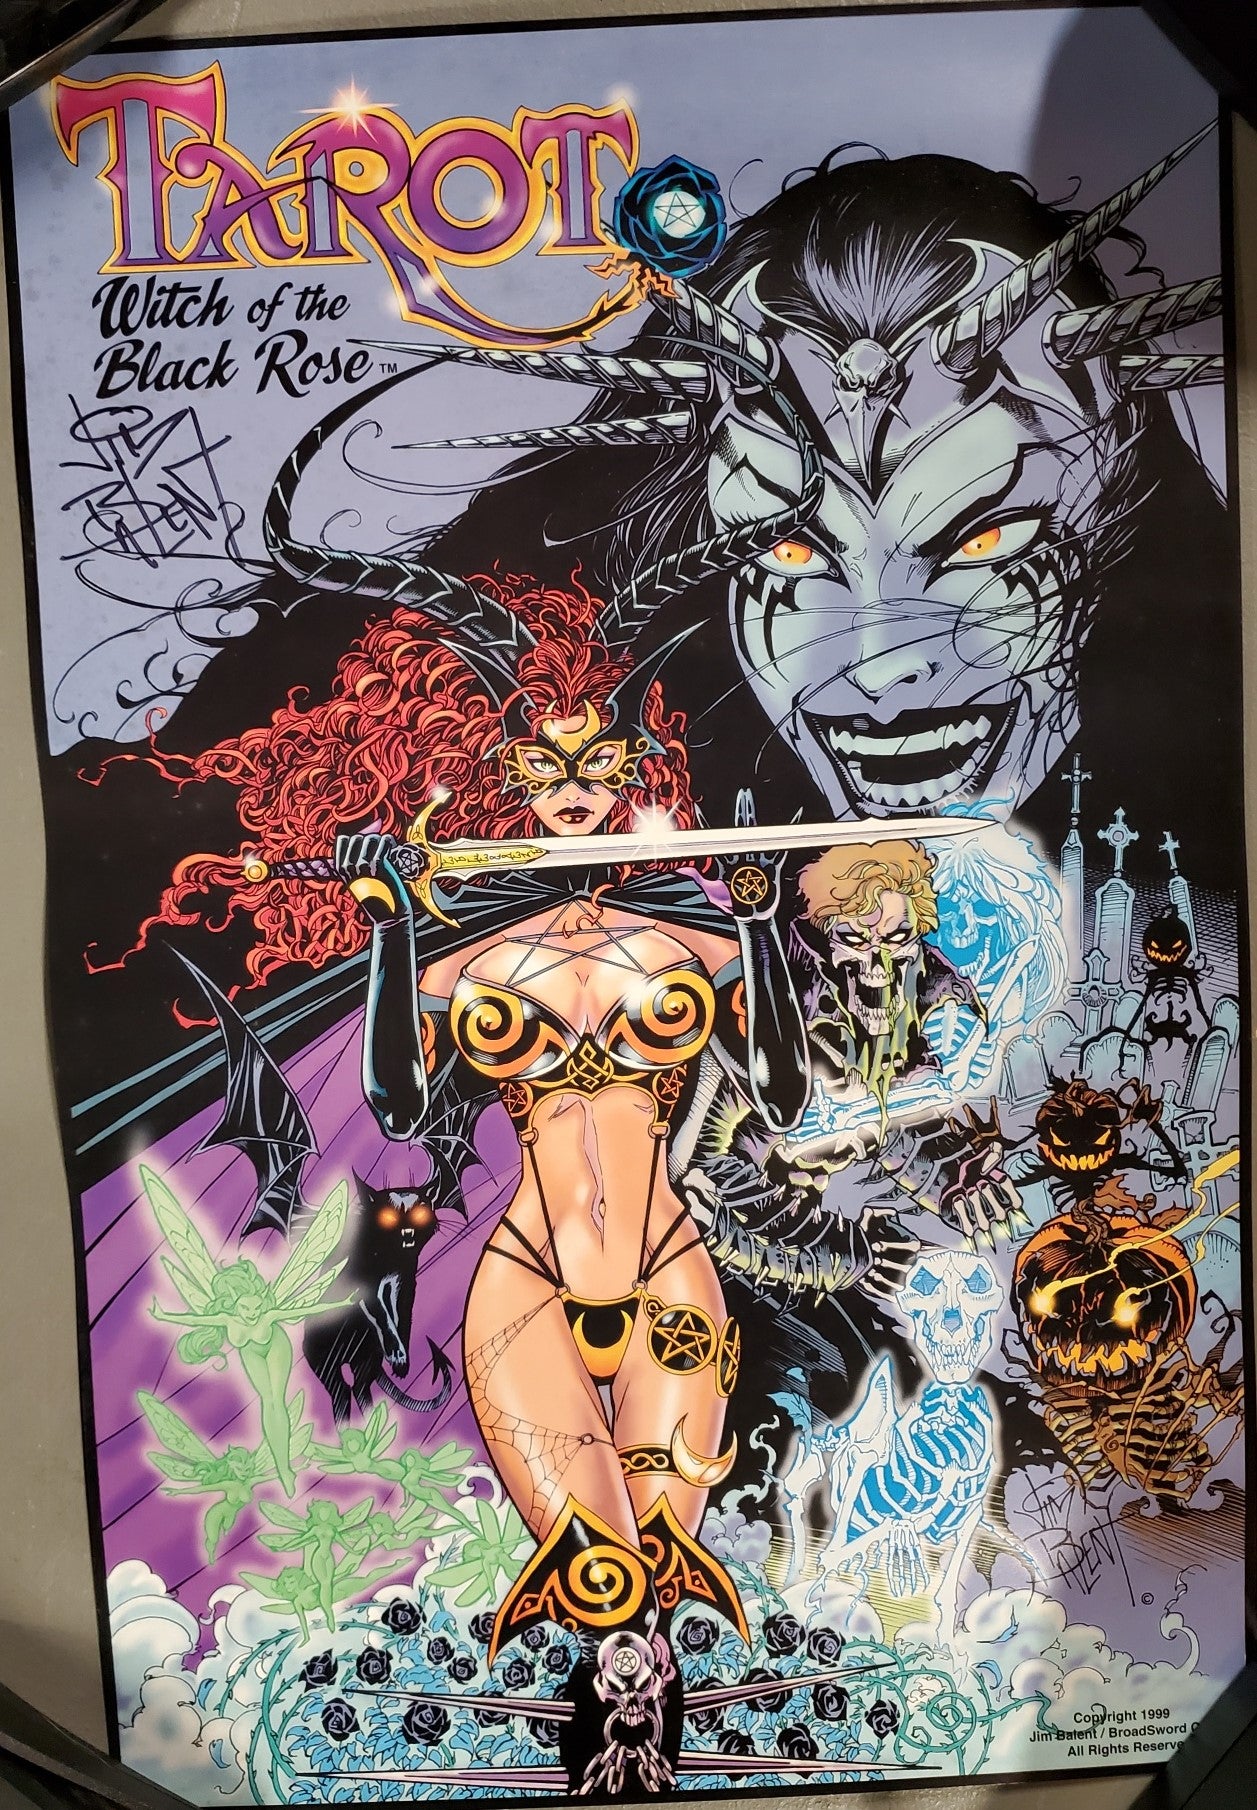 Tarot: Witch of the Black Rose #1 signed print by Jim Balent